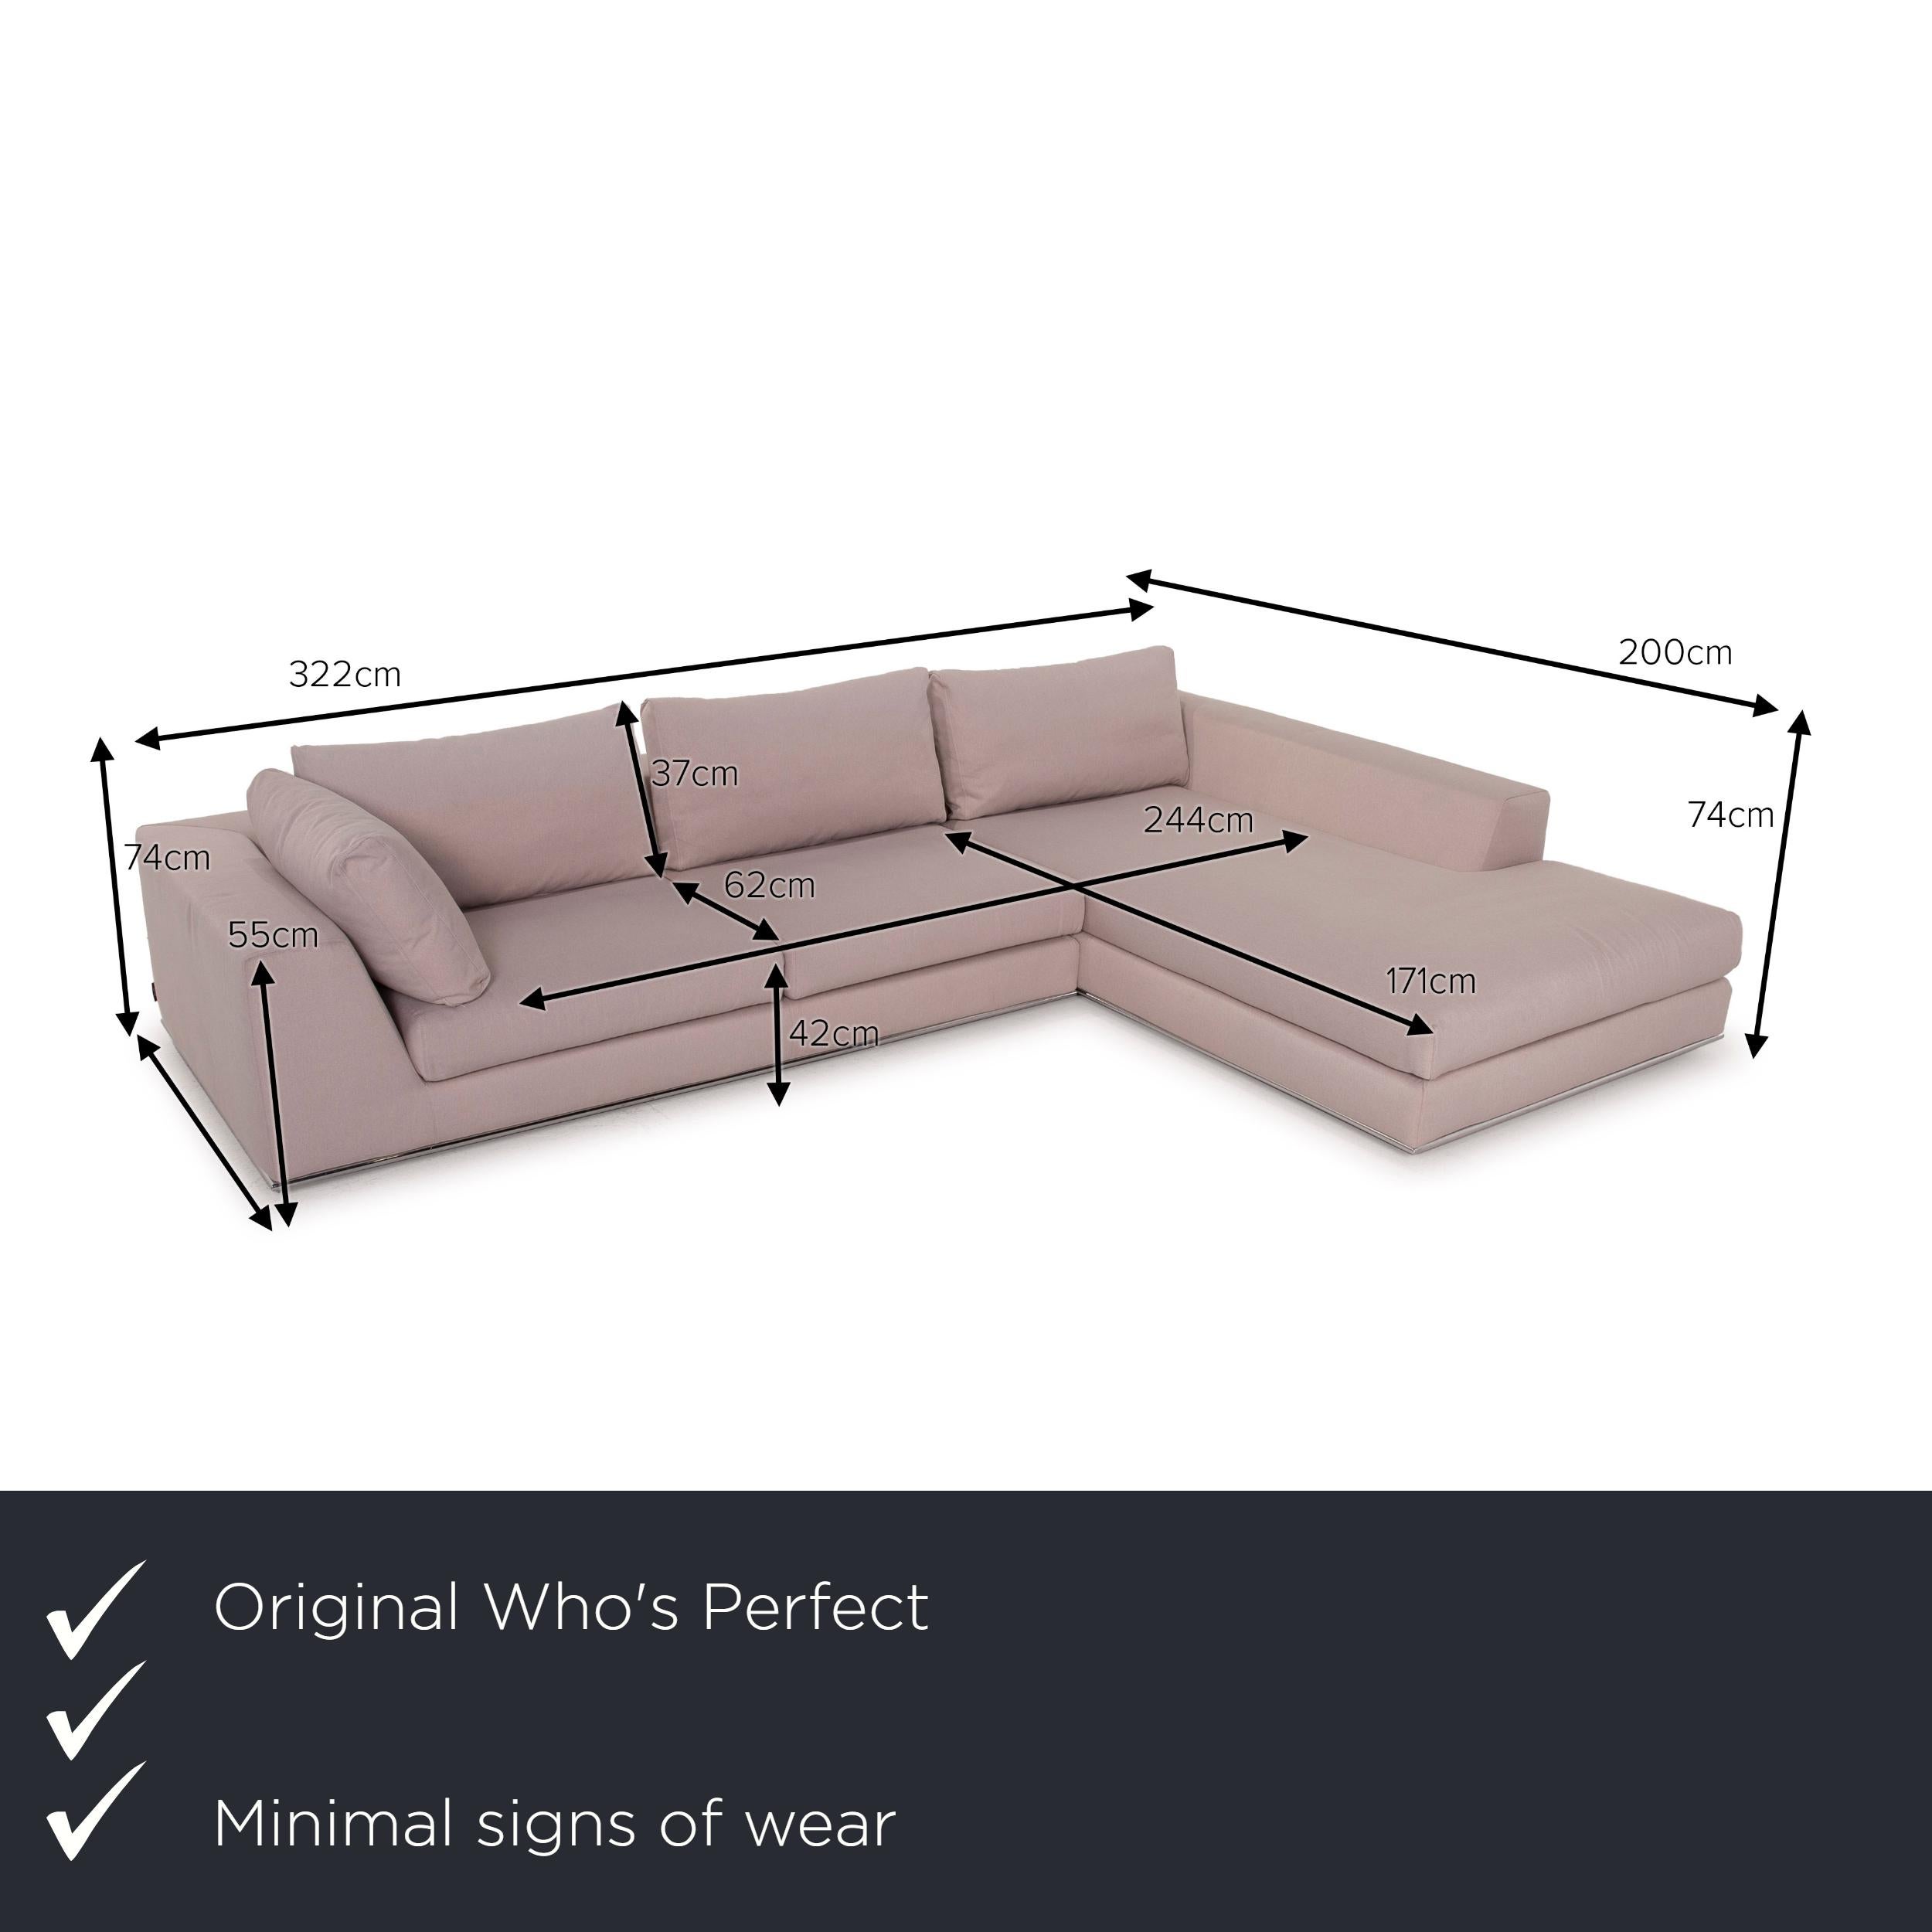 We present to you a Who's Perfect La Nuova Casa Liverpool fabric sofa beige.

Product measurements in centimeters:

Depth 105
Width 322
Height 74
Seat height 42
Rest height 55
Seat depth 62
Seat width 244
Back height 37.
 
 
  